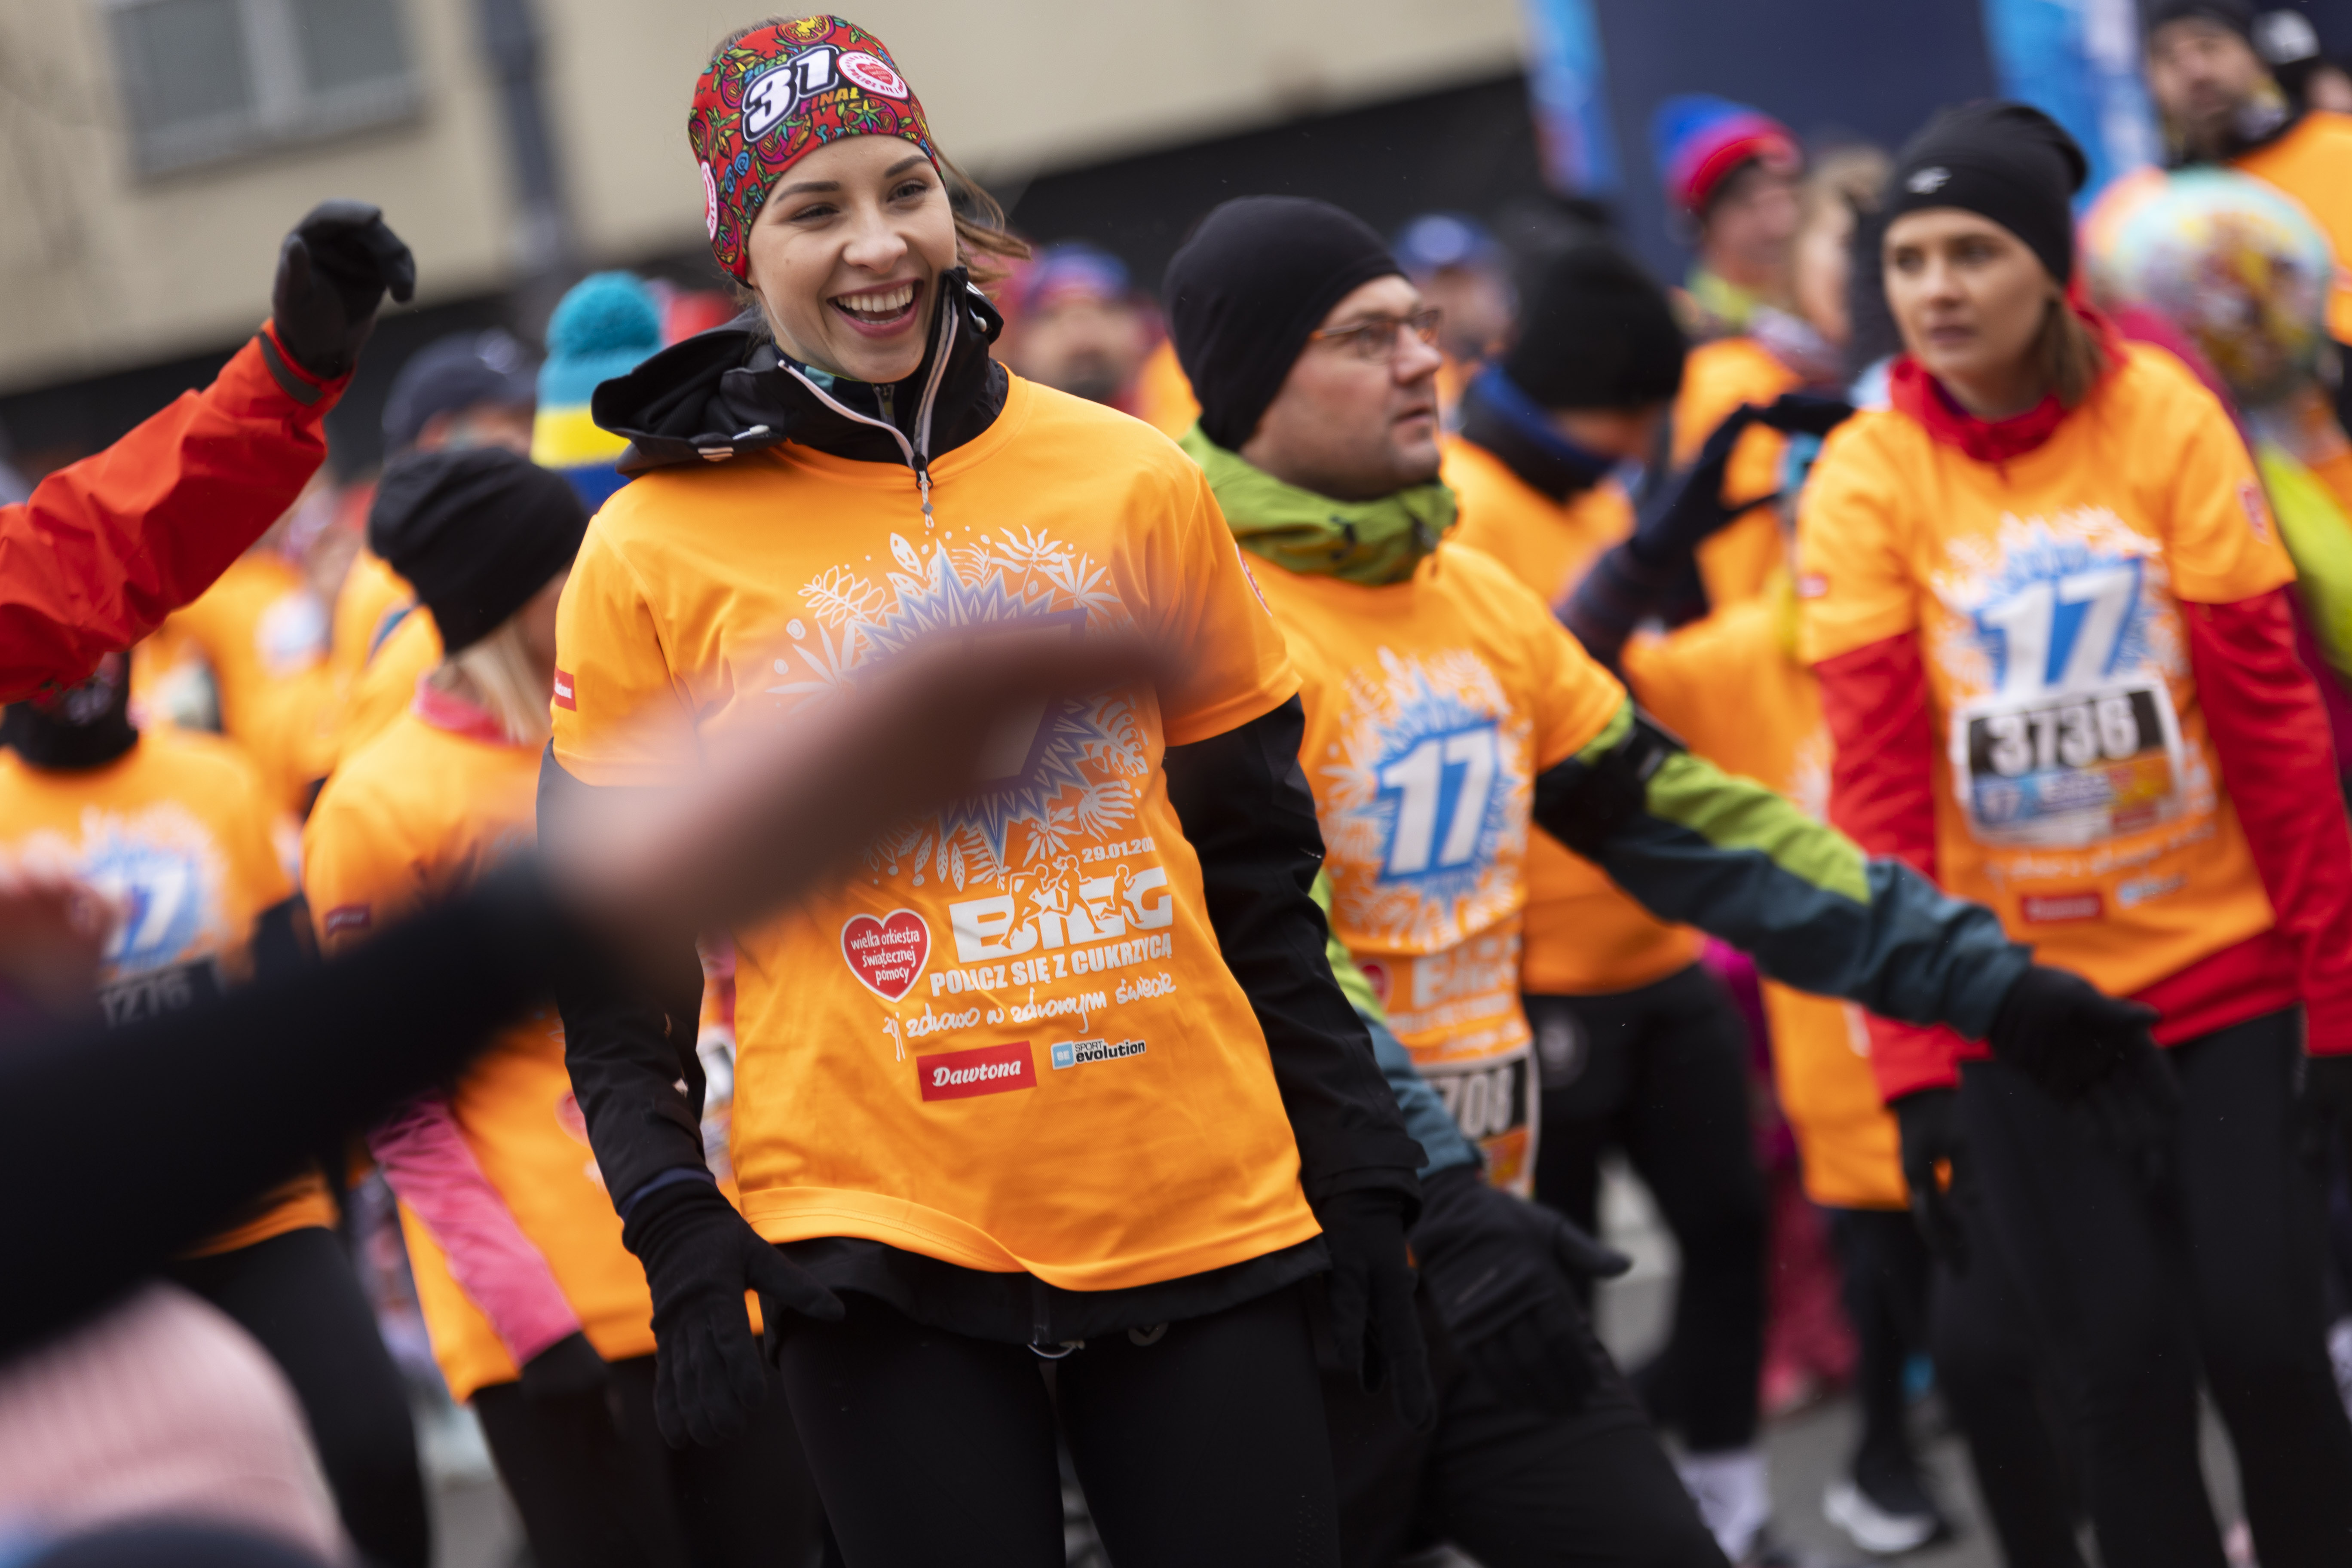 Participants of the 17th Get Even with Diabetes Run, photo: Basia Krasuska